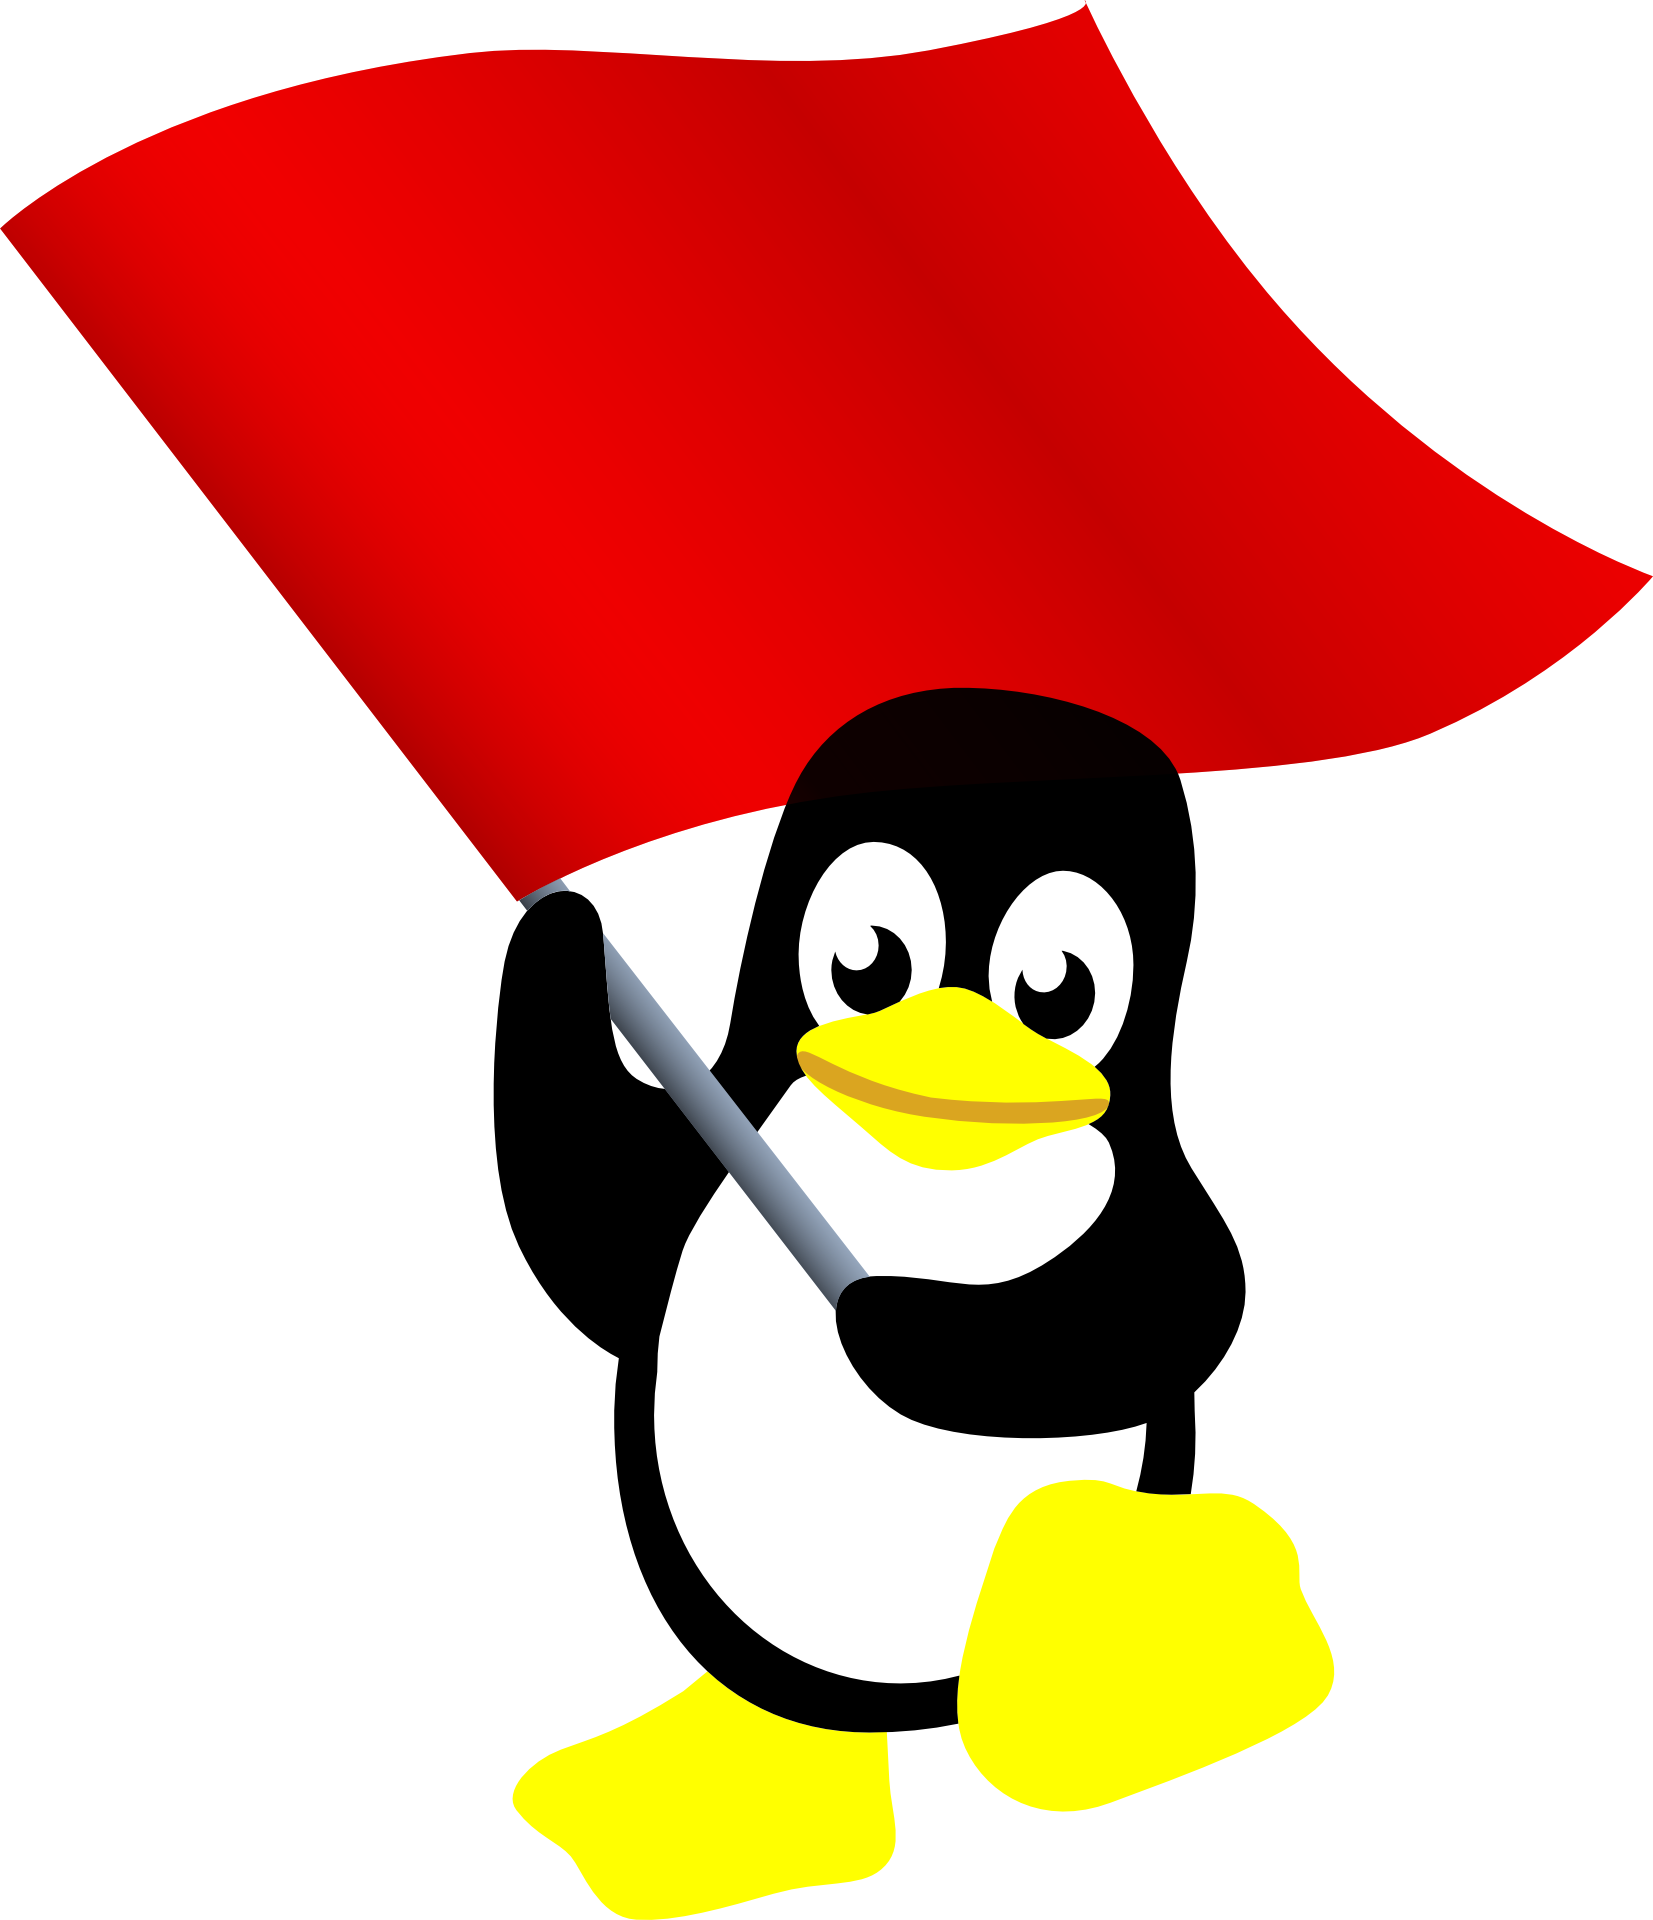 File:Tux carrying the red flag.png